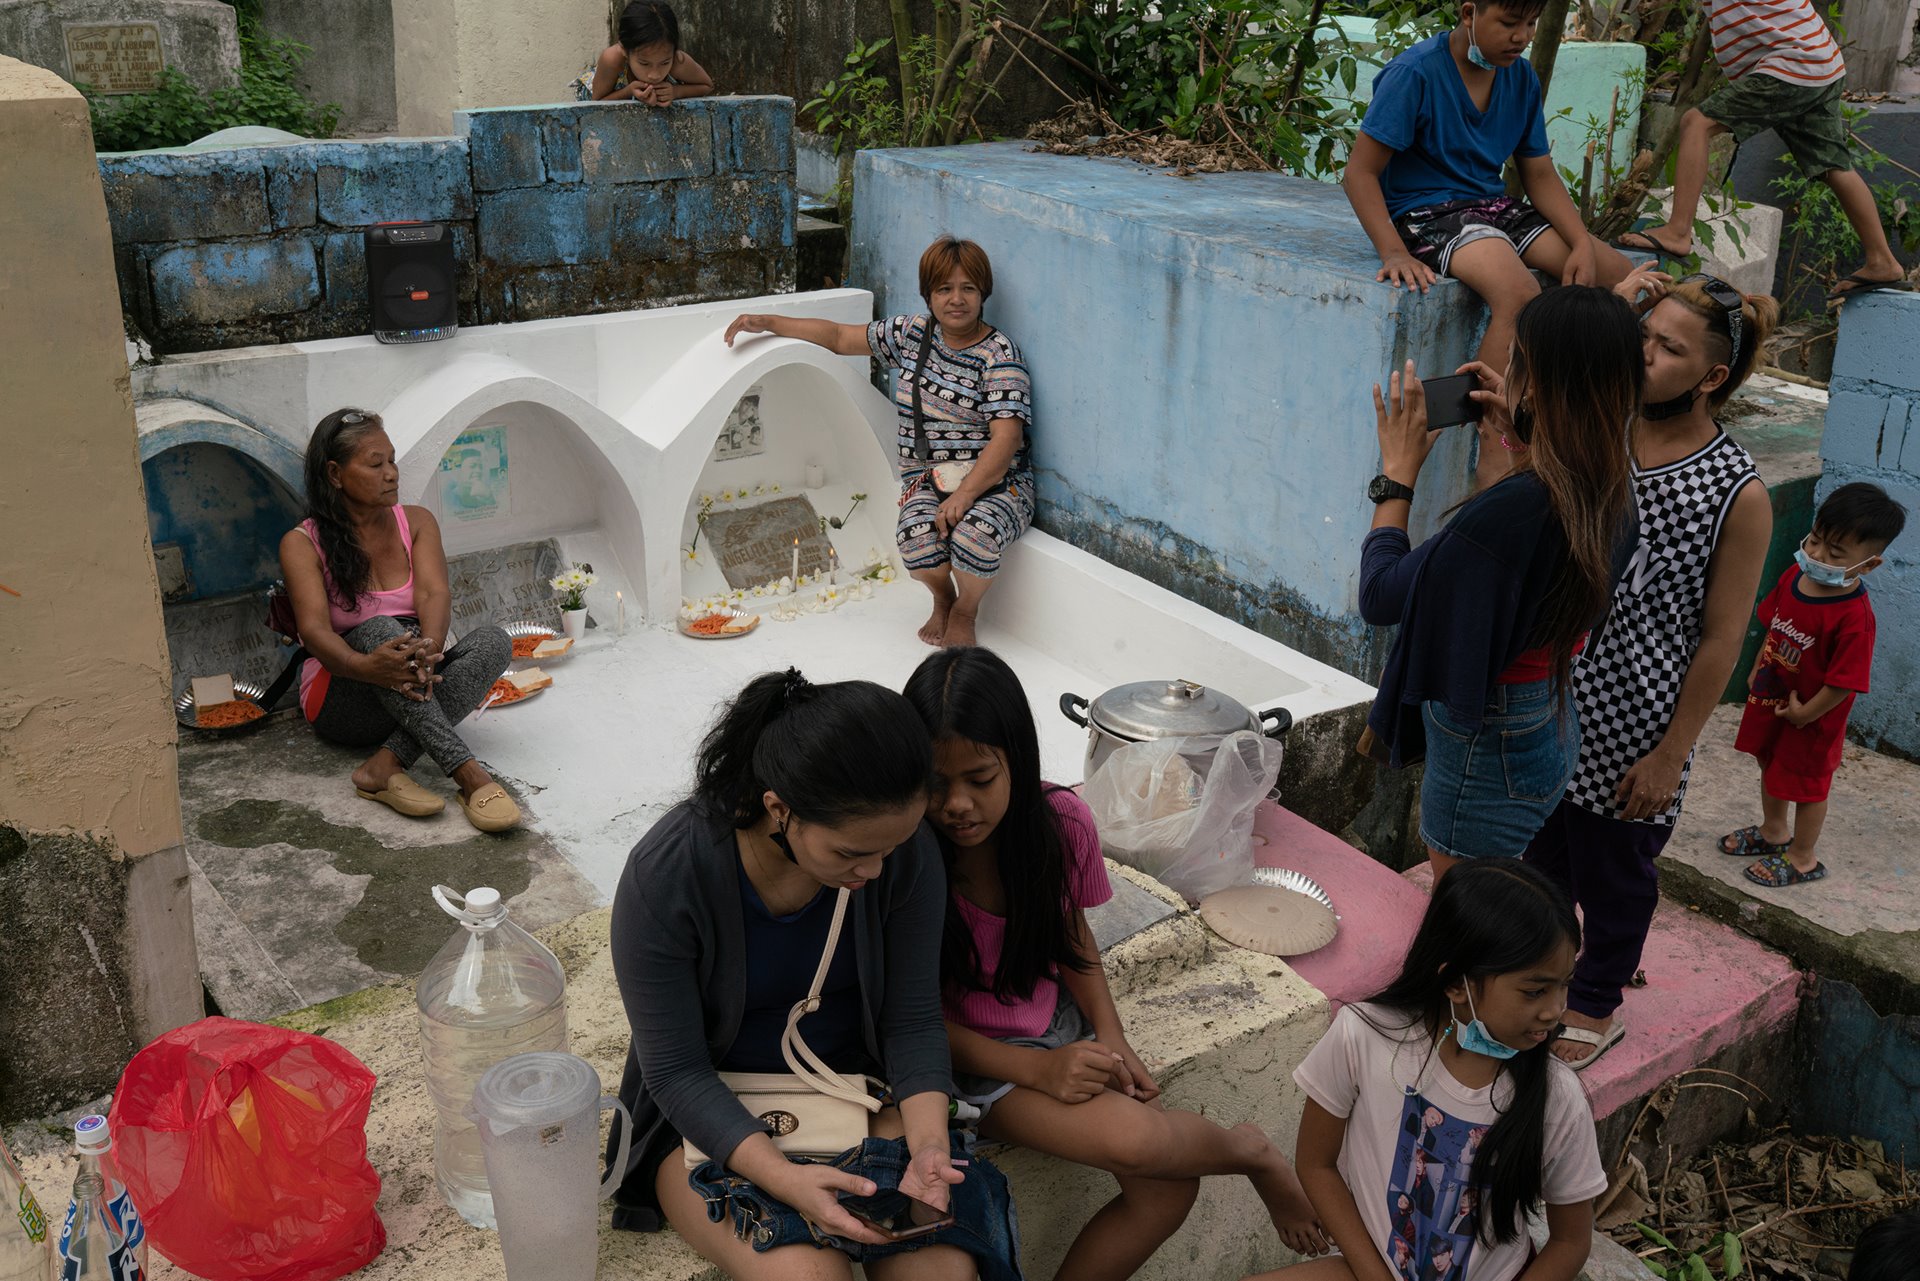 Isabelita Espinosa (seated to left of graves), Emily Soriano (seated to right) and their families commemorate the fifth anniversary of the death of their sons Sonny and Angelito, in Bagong Silang &ndash; Tala Cemetery in Caloocan, the Philippines. Living in the same neighborhood and close in age, Isabelita and Emily&rsquo;s sons were friends and were killed together with five others for allegedly going to a drug den, in what became known as the &ldquo;Caloocan massacre&rdquo;. The mothers have been active with Rise Up for Life and for Rights, a justice-oriented network for families of war-on-drugs victims.&nbsp;